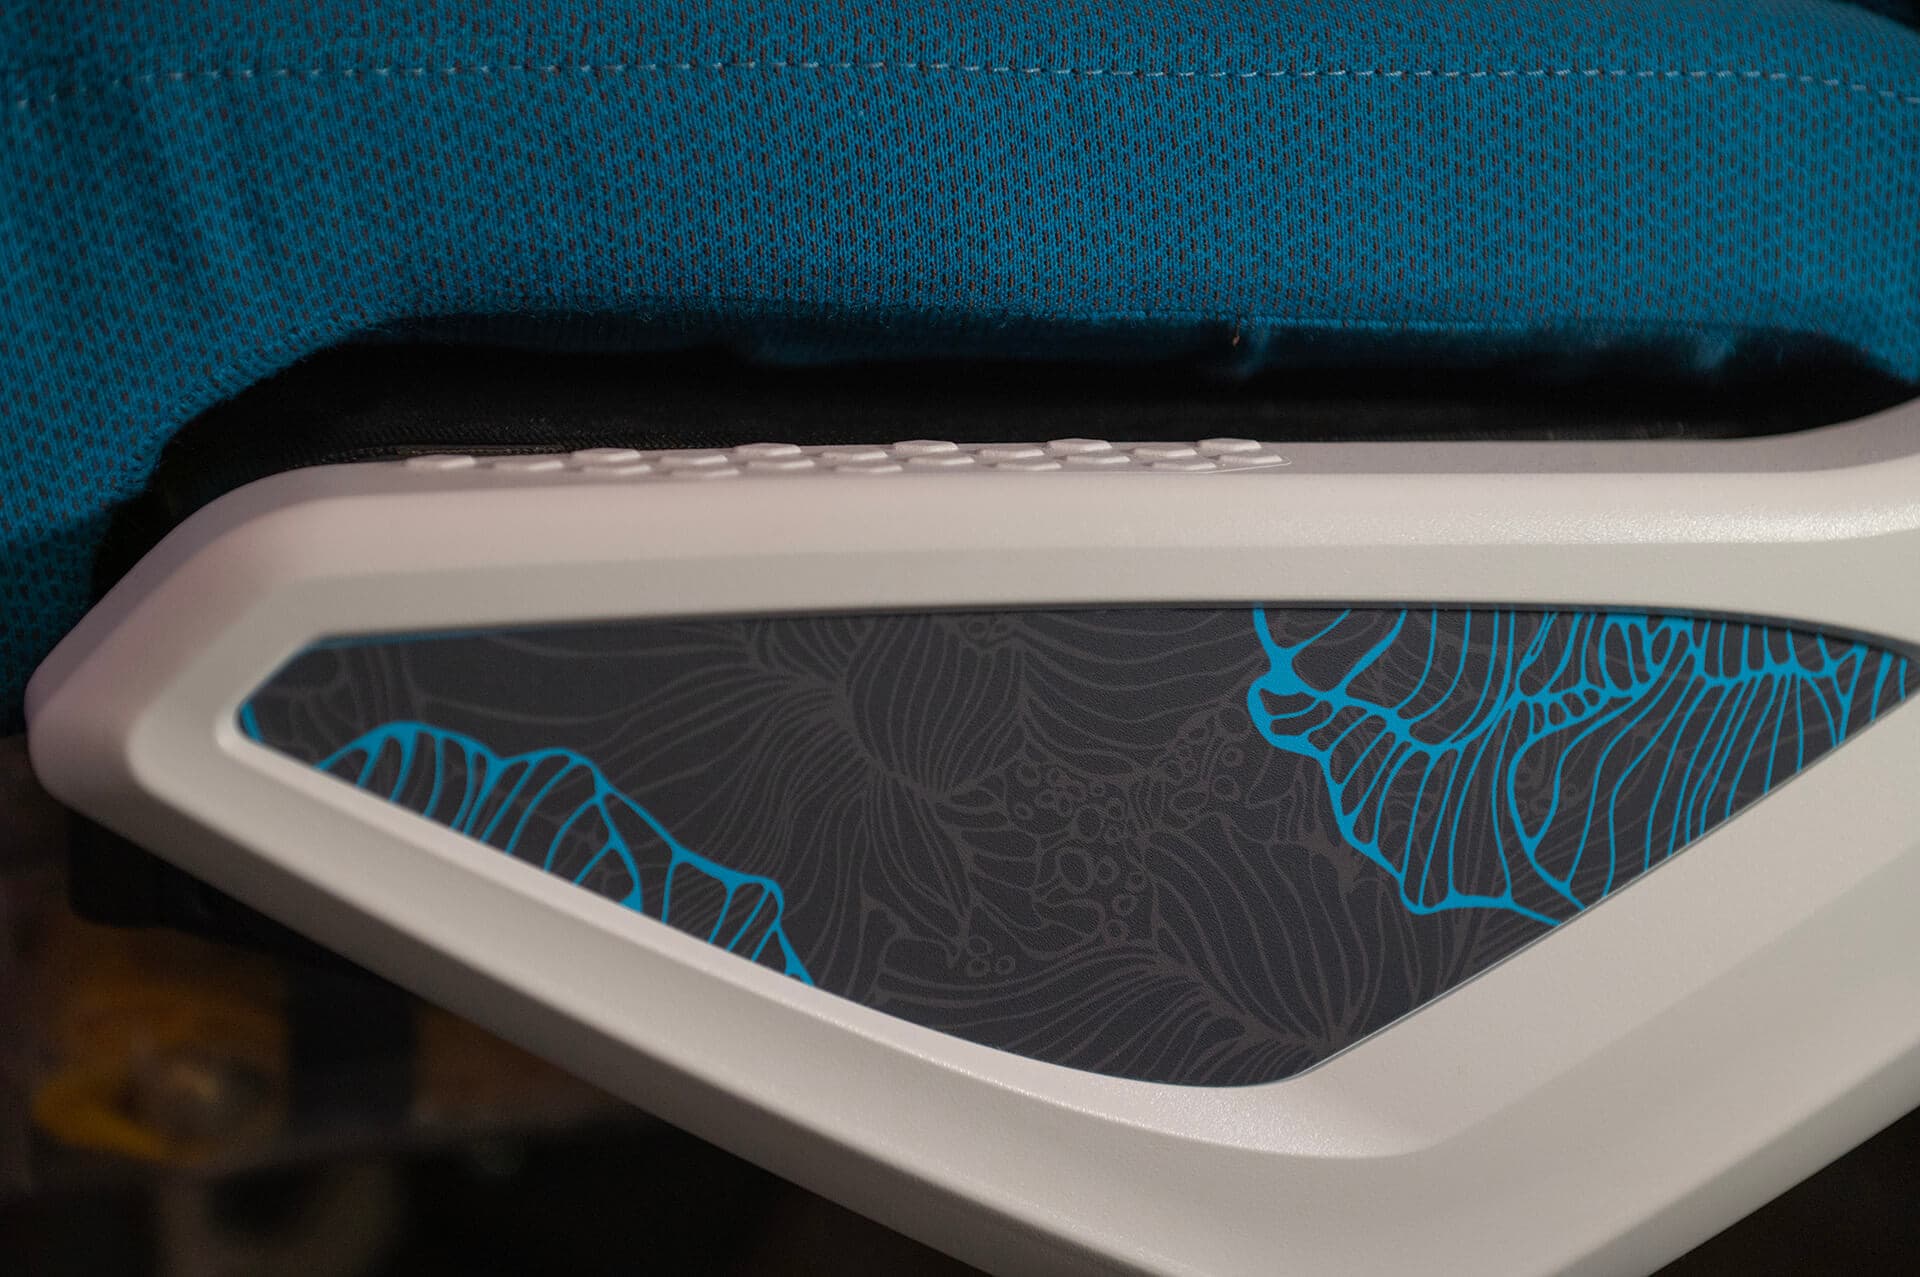 Hawaiian Airlines seat with side detail showing floral patterns in blue tone fabric